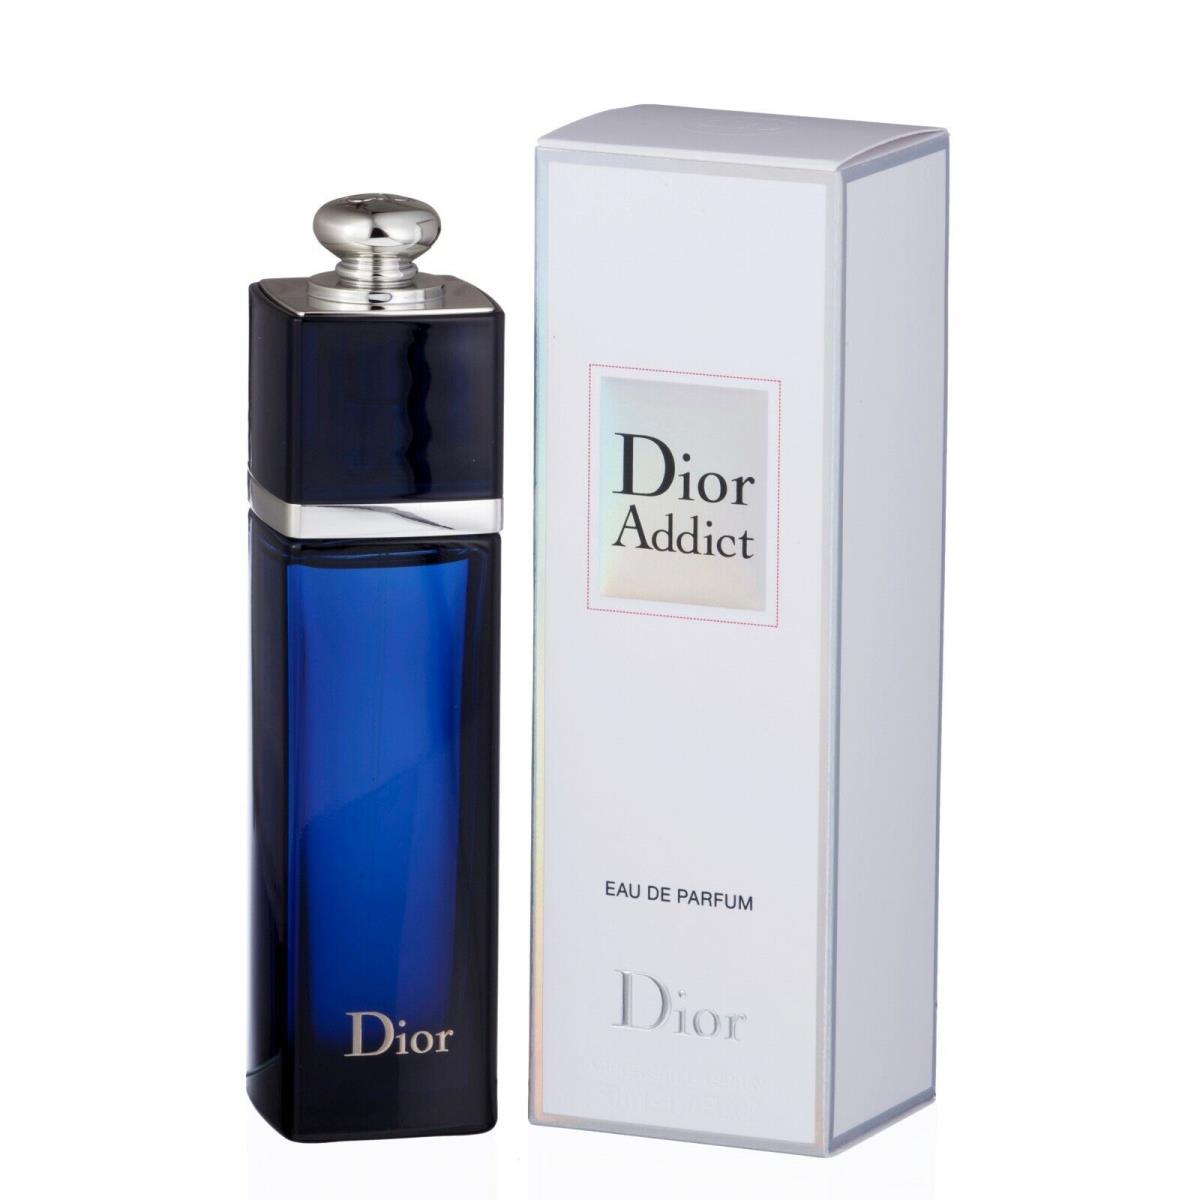 Addict by Christian Dior Edp Spray Packaging 2014 1.7 Oz For Women